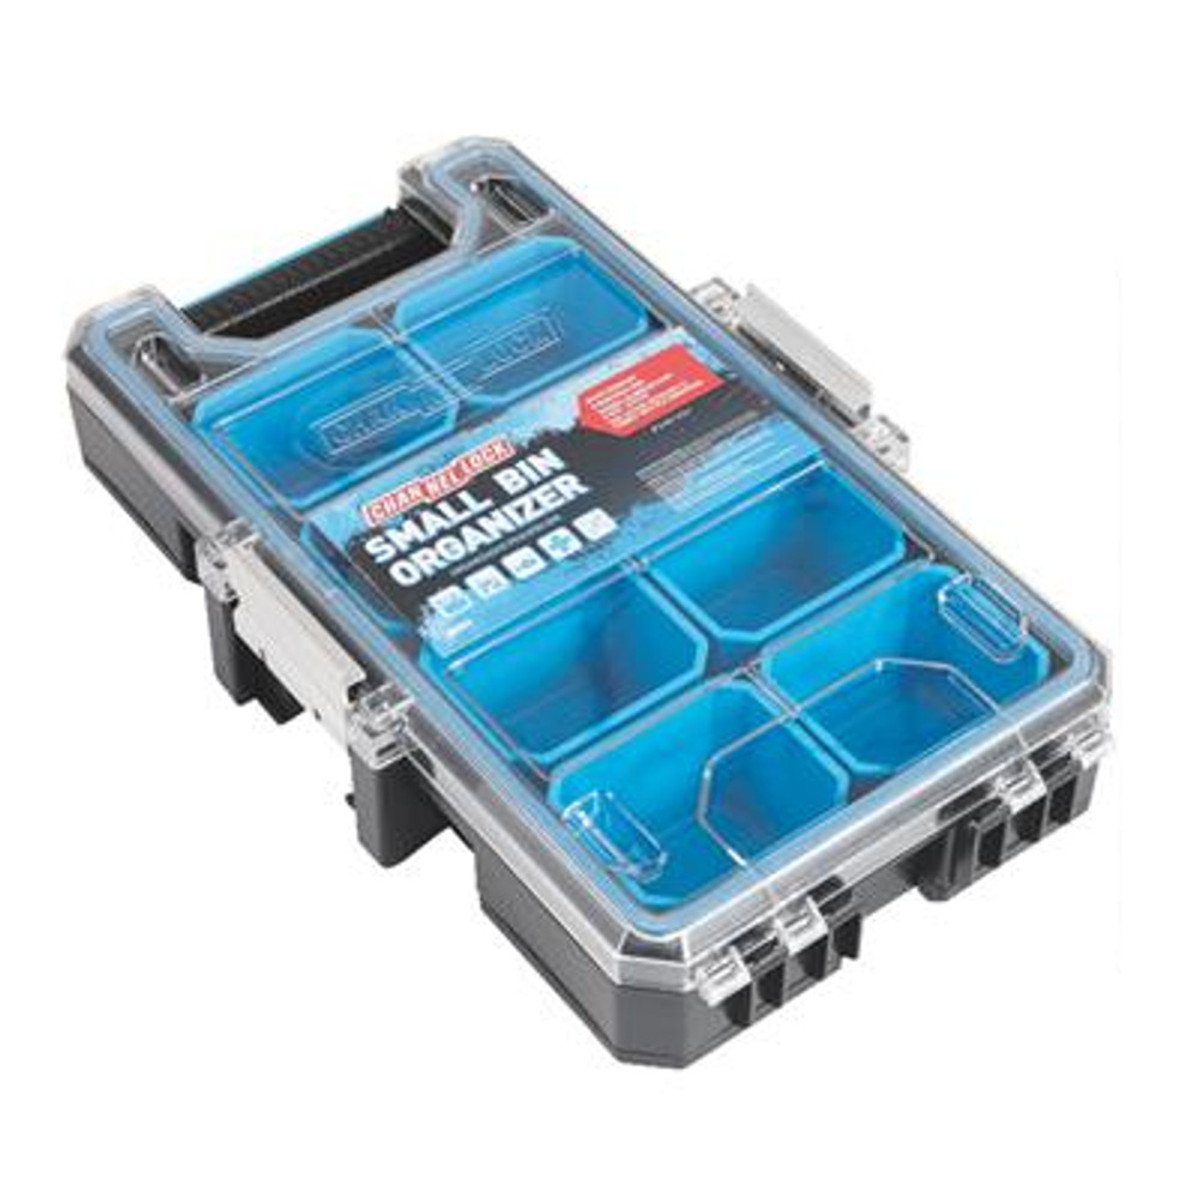 Channellock Small Parts Organizer Storage Box - (Available For